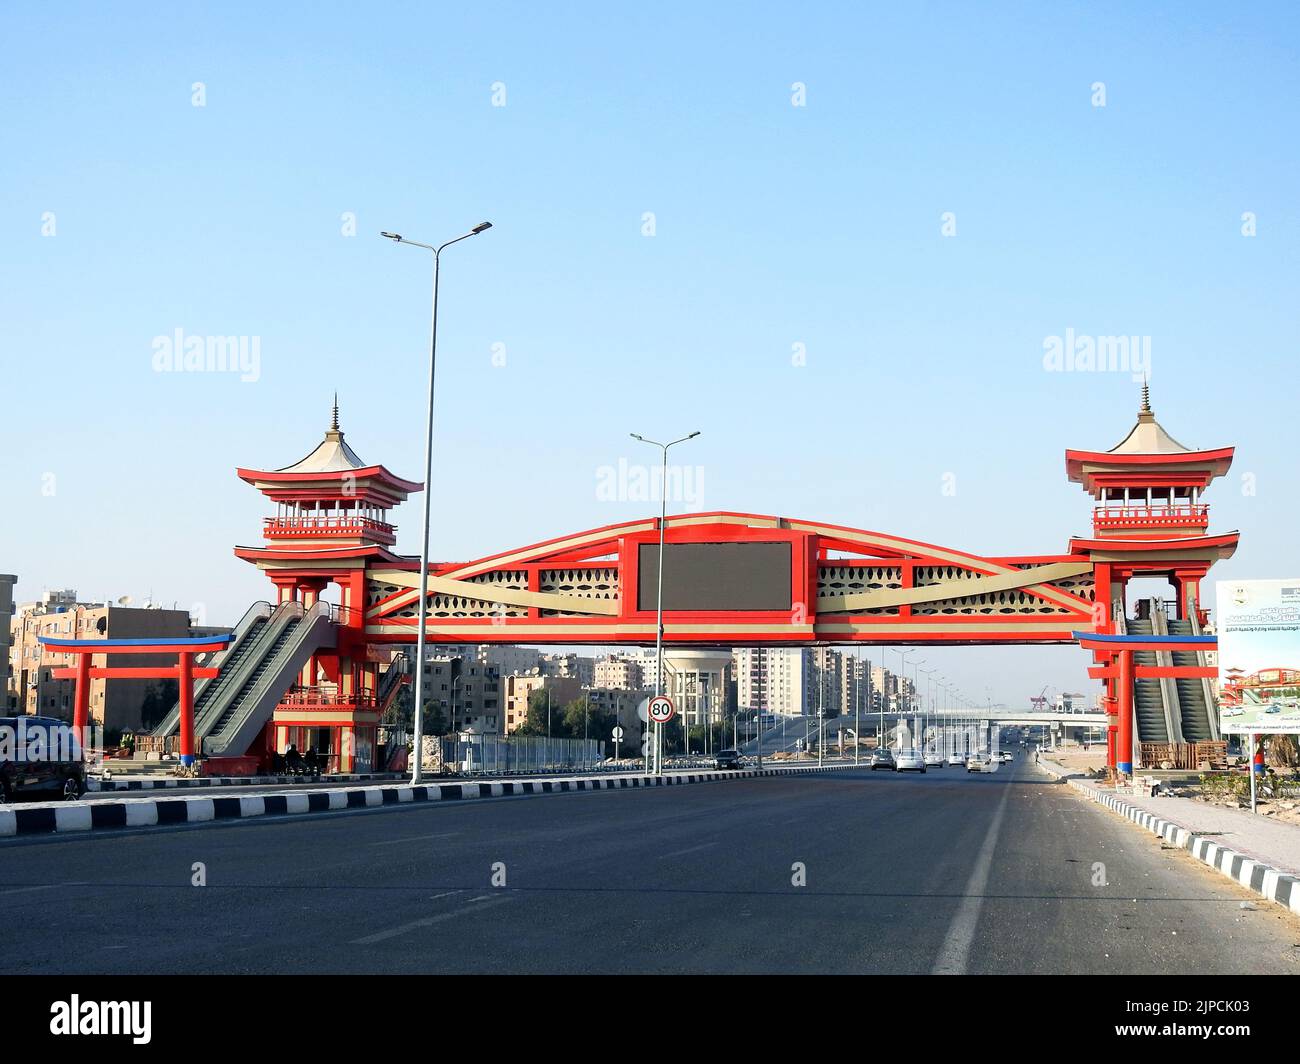 Cairo, Egypt, July 31 2022: Shinzo Abe axis patrol highway in Egypt with a pedestrian bridge finished in traditional Japanese architectural style, the Stock Photo